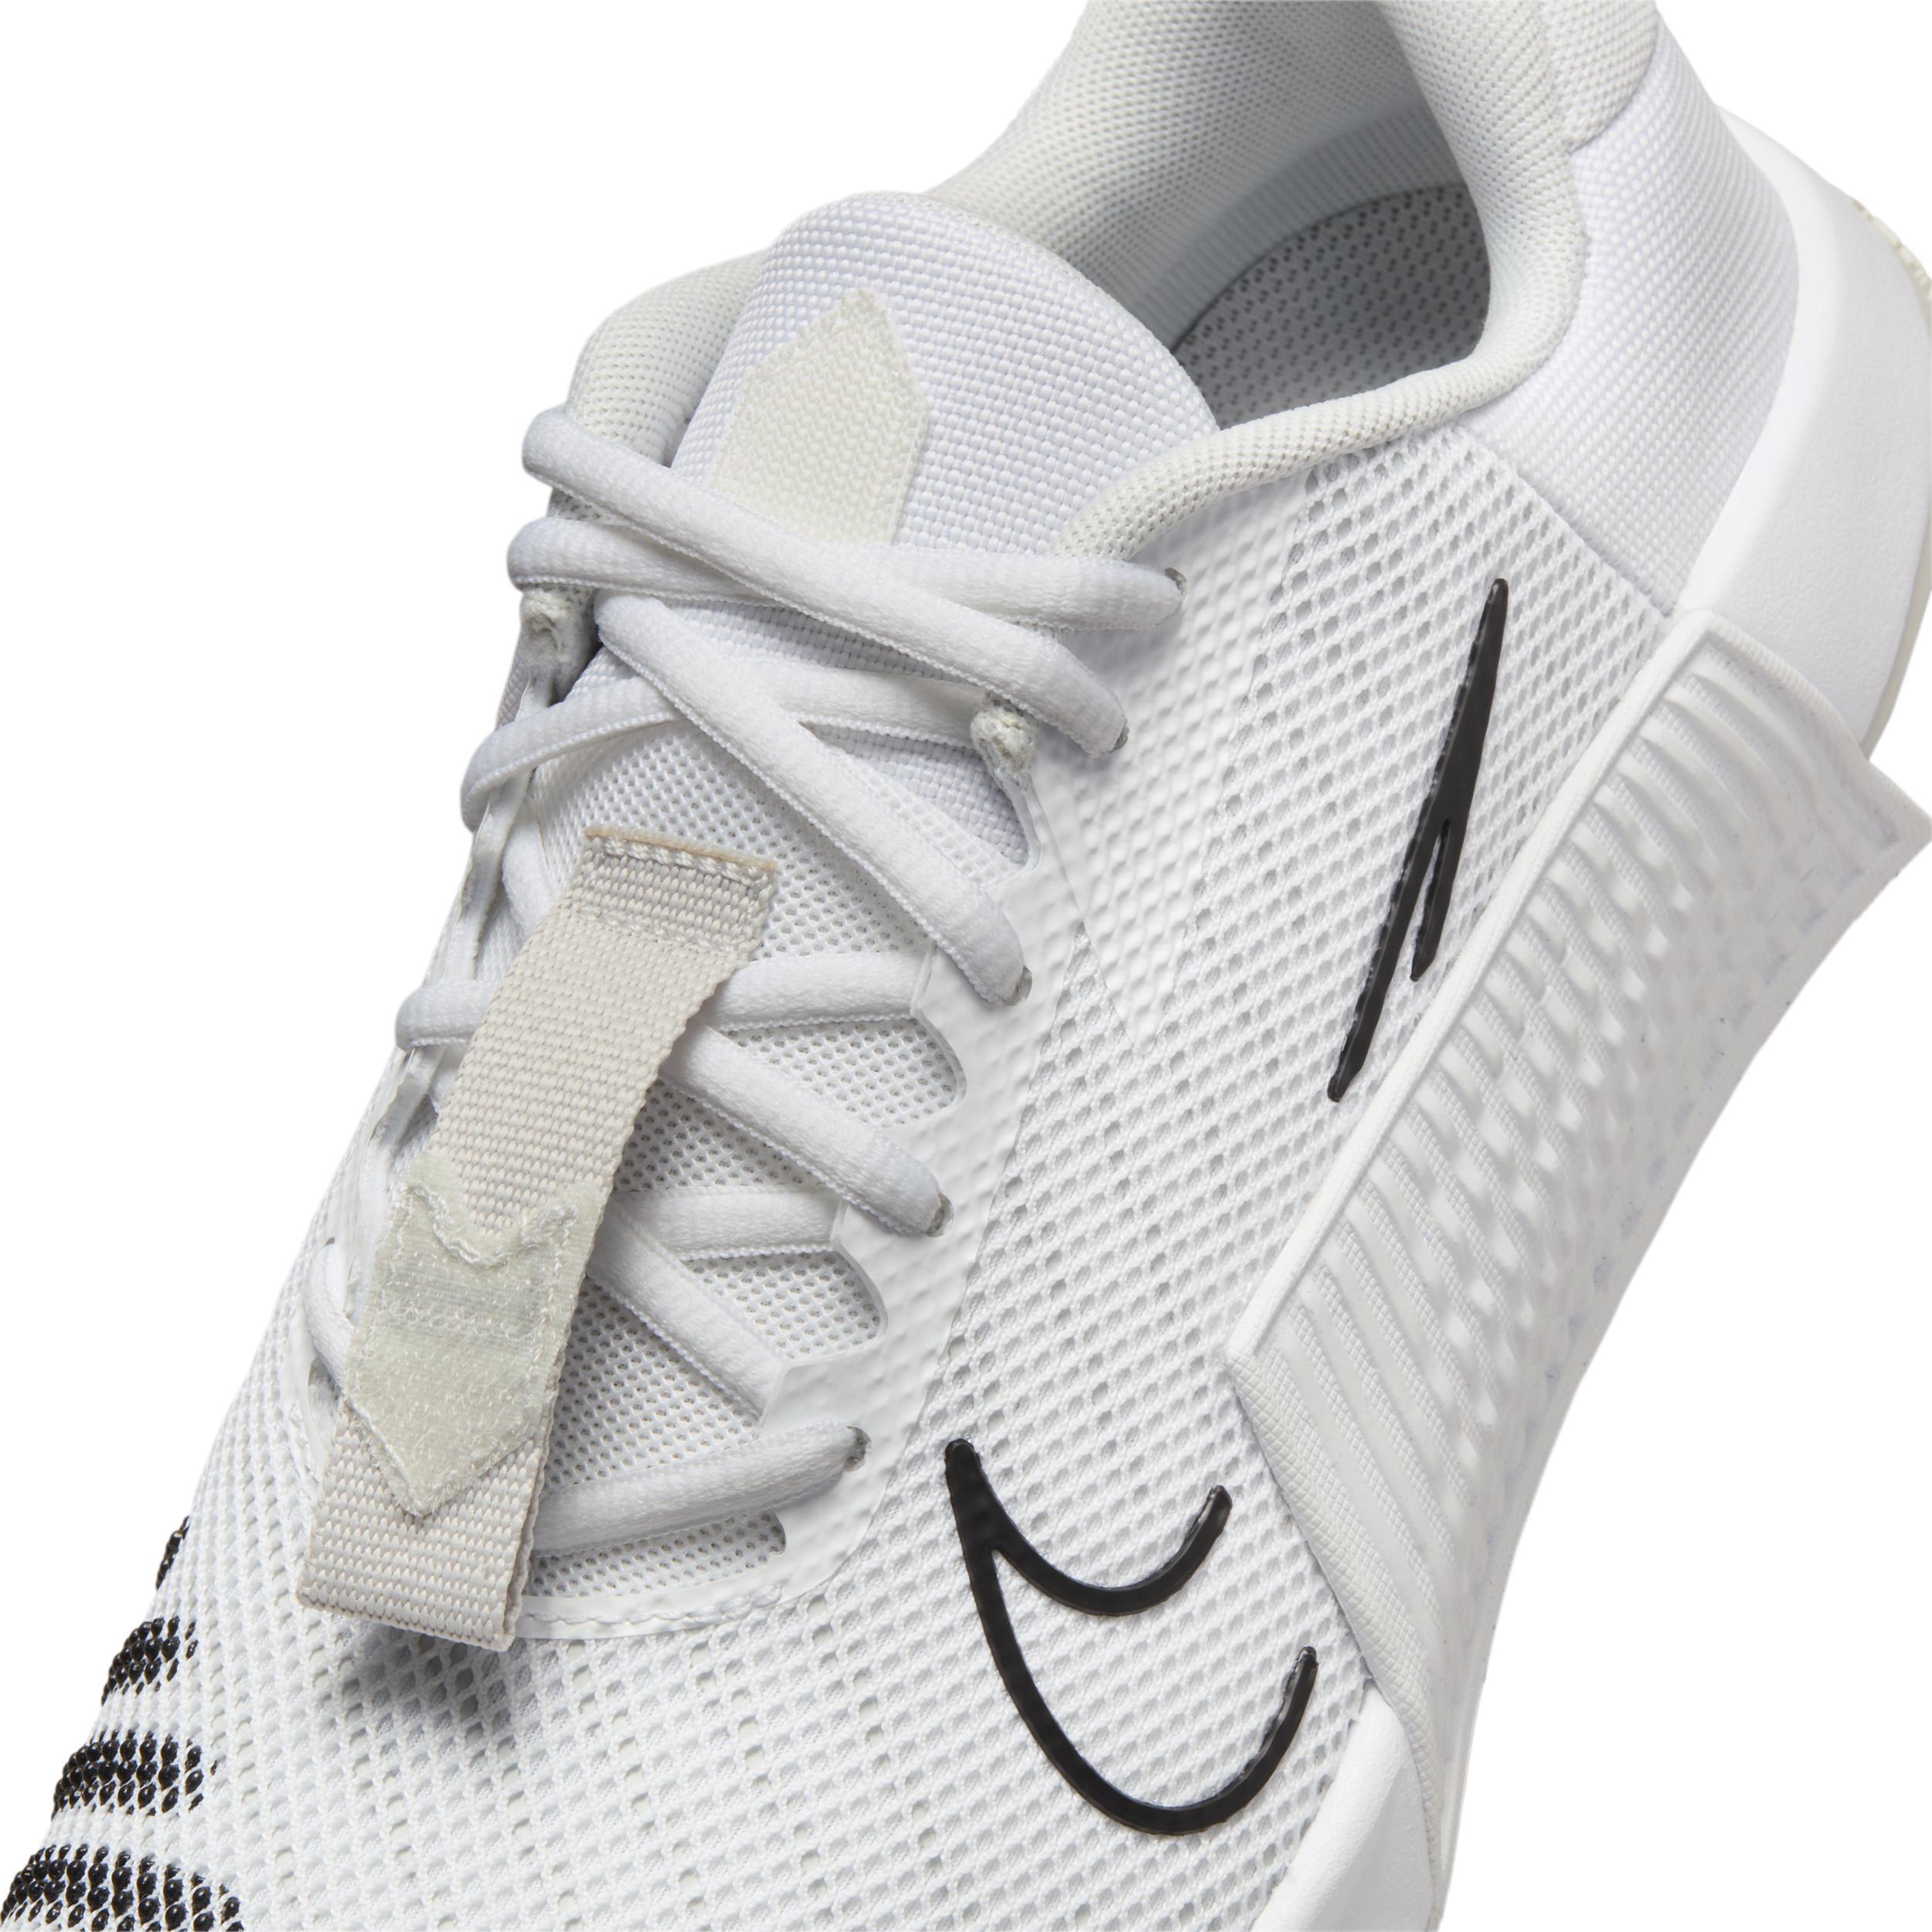 Nike Men's Metcon 9 TB Workout Shoes Product Image